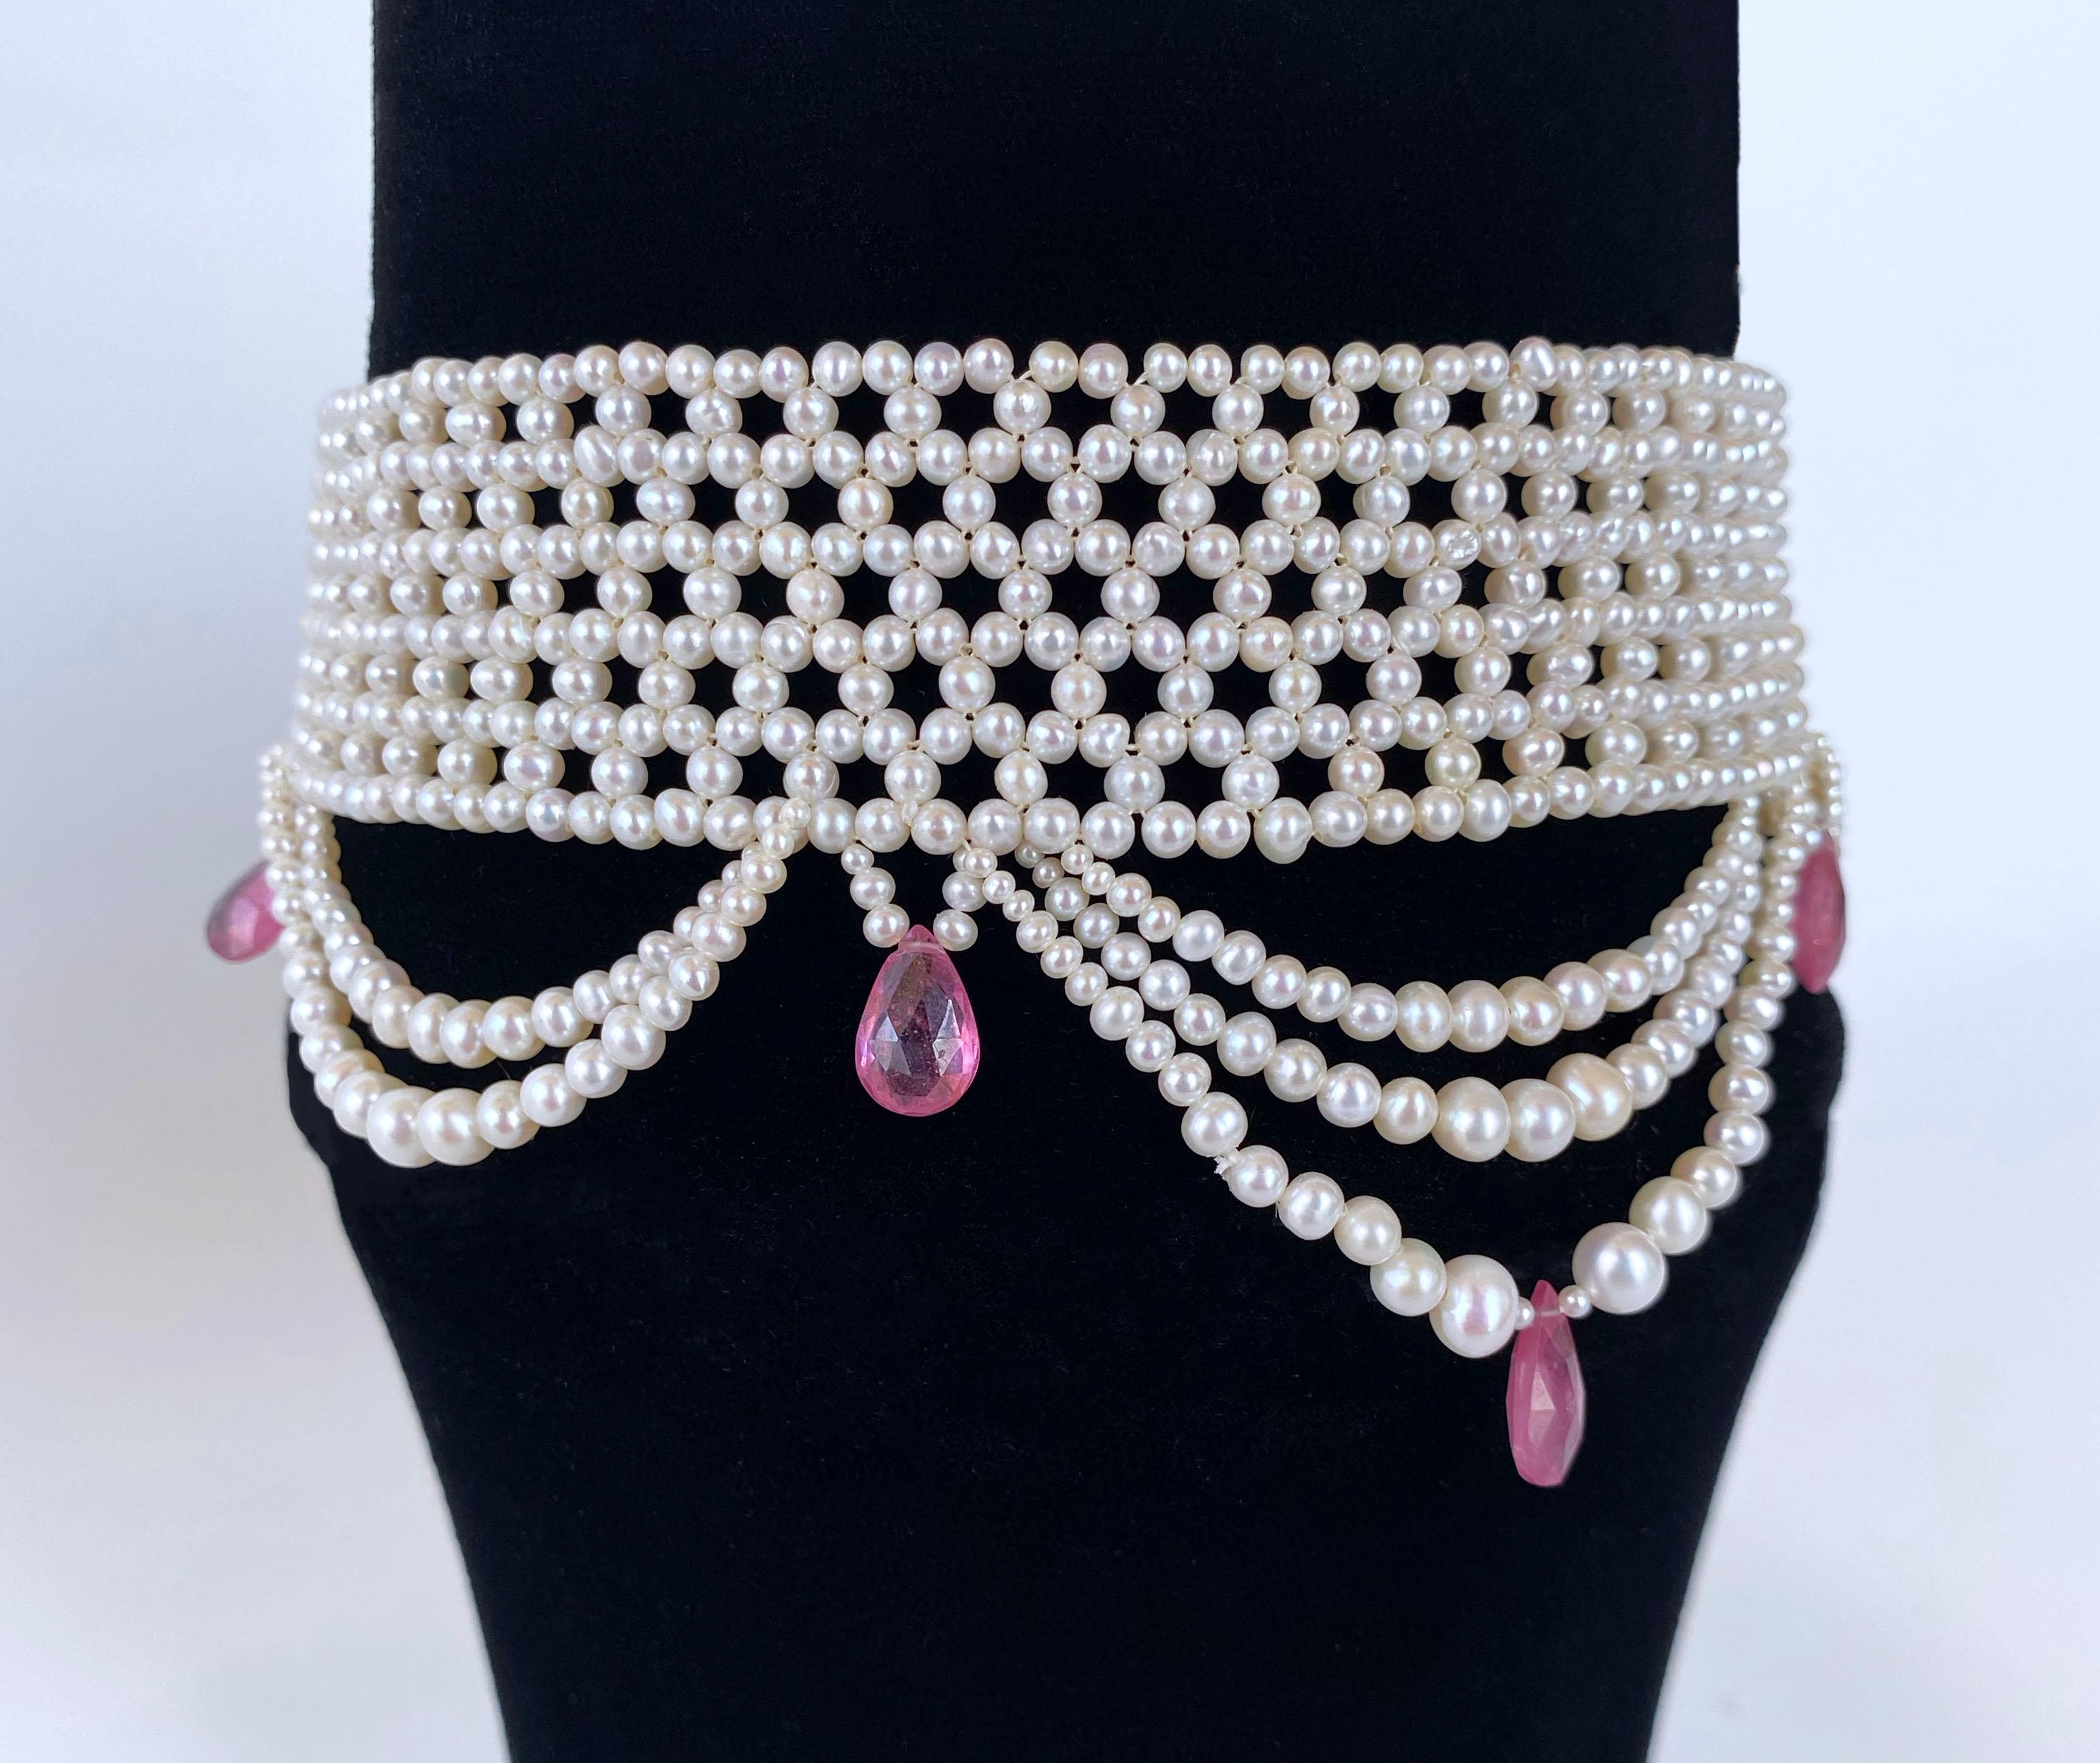 Briolette Cut Marina J. Pink Sapphire & Pearl Woven Choker with Rhodium Plated Silver Clasp For Sale